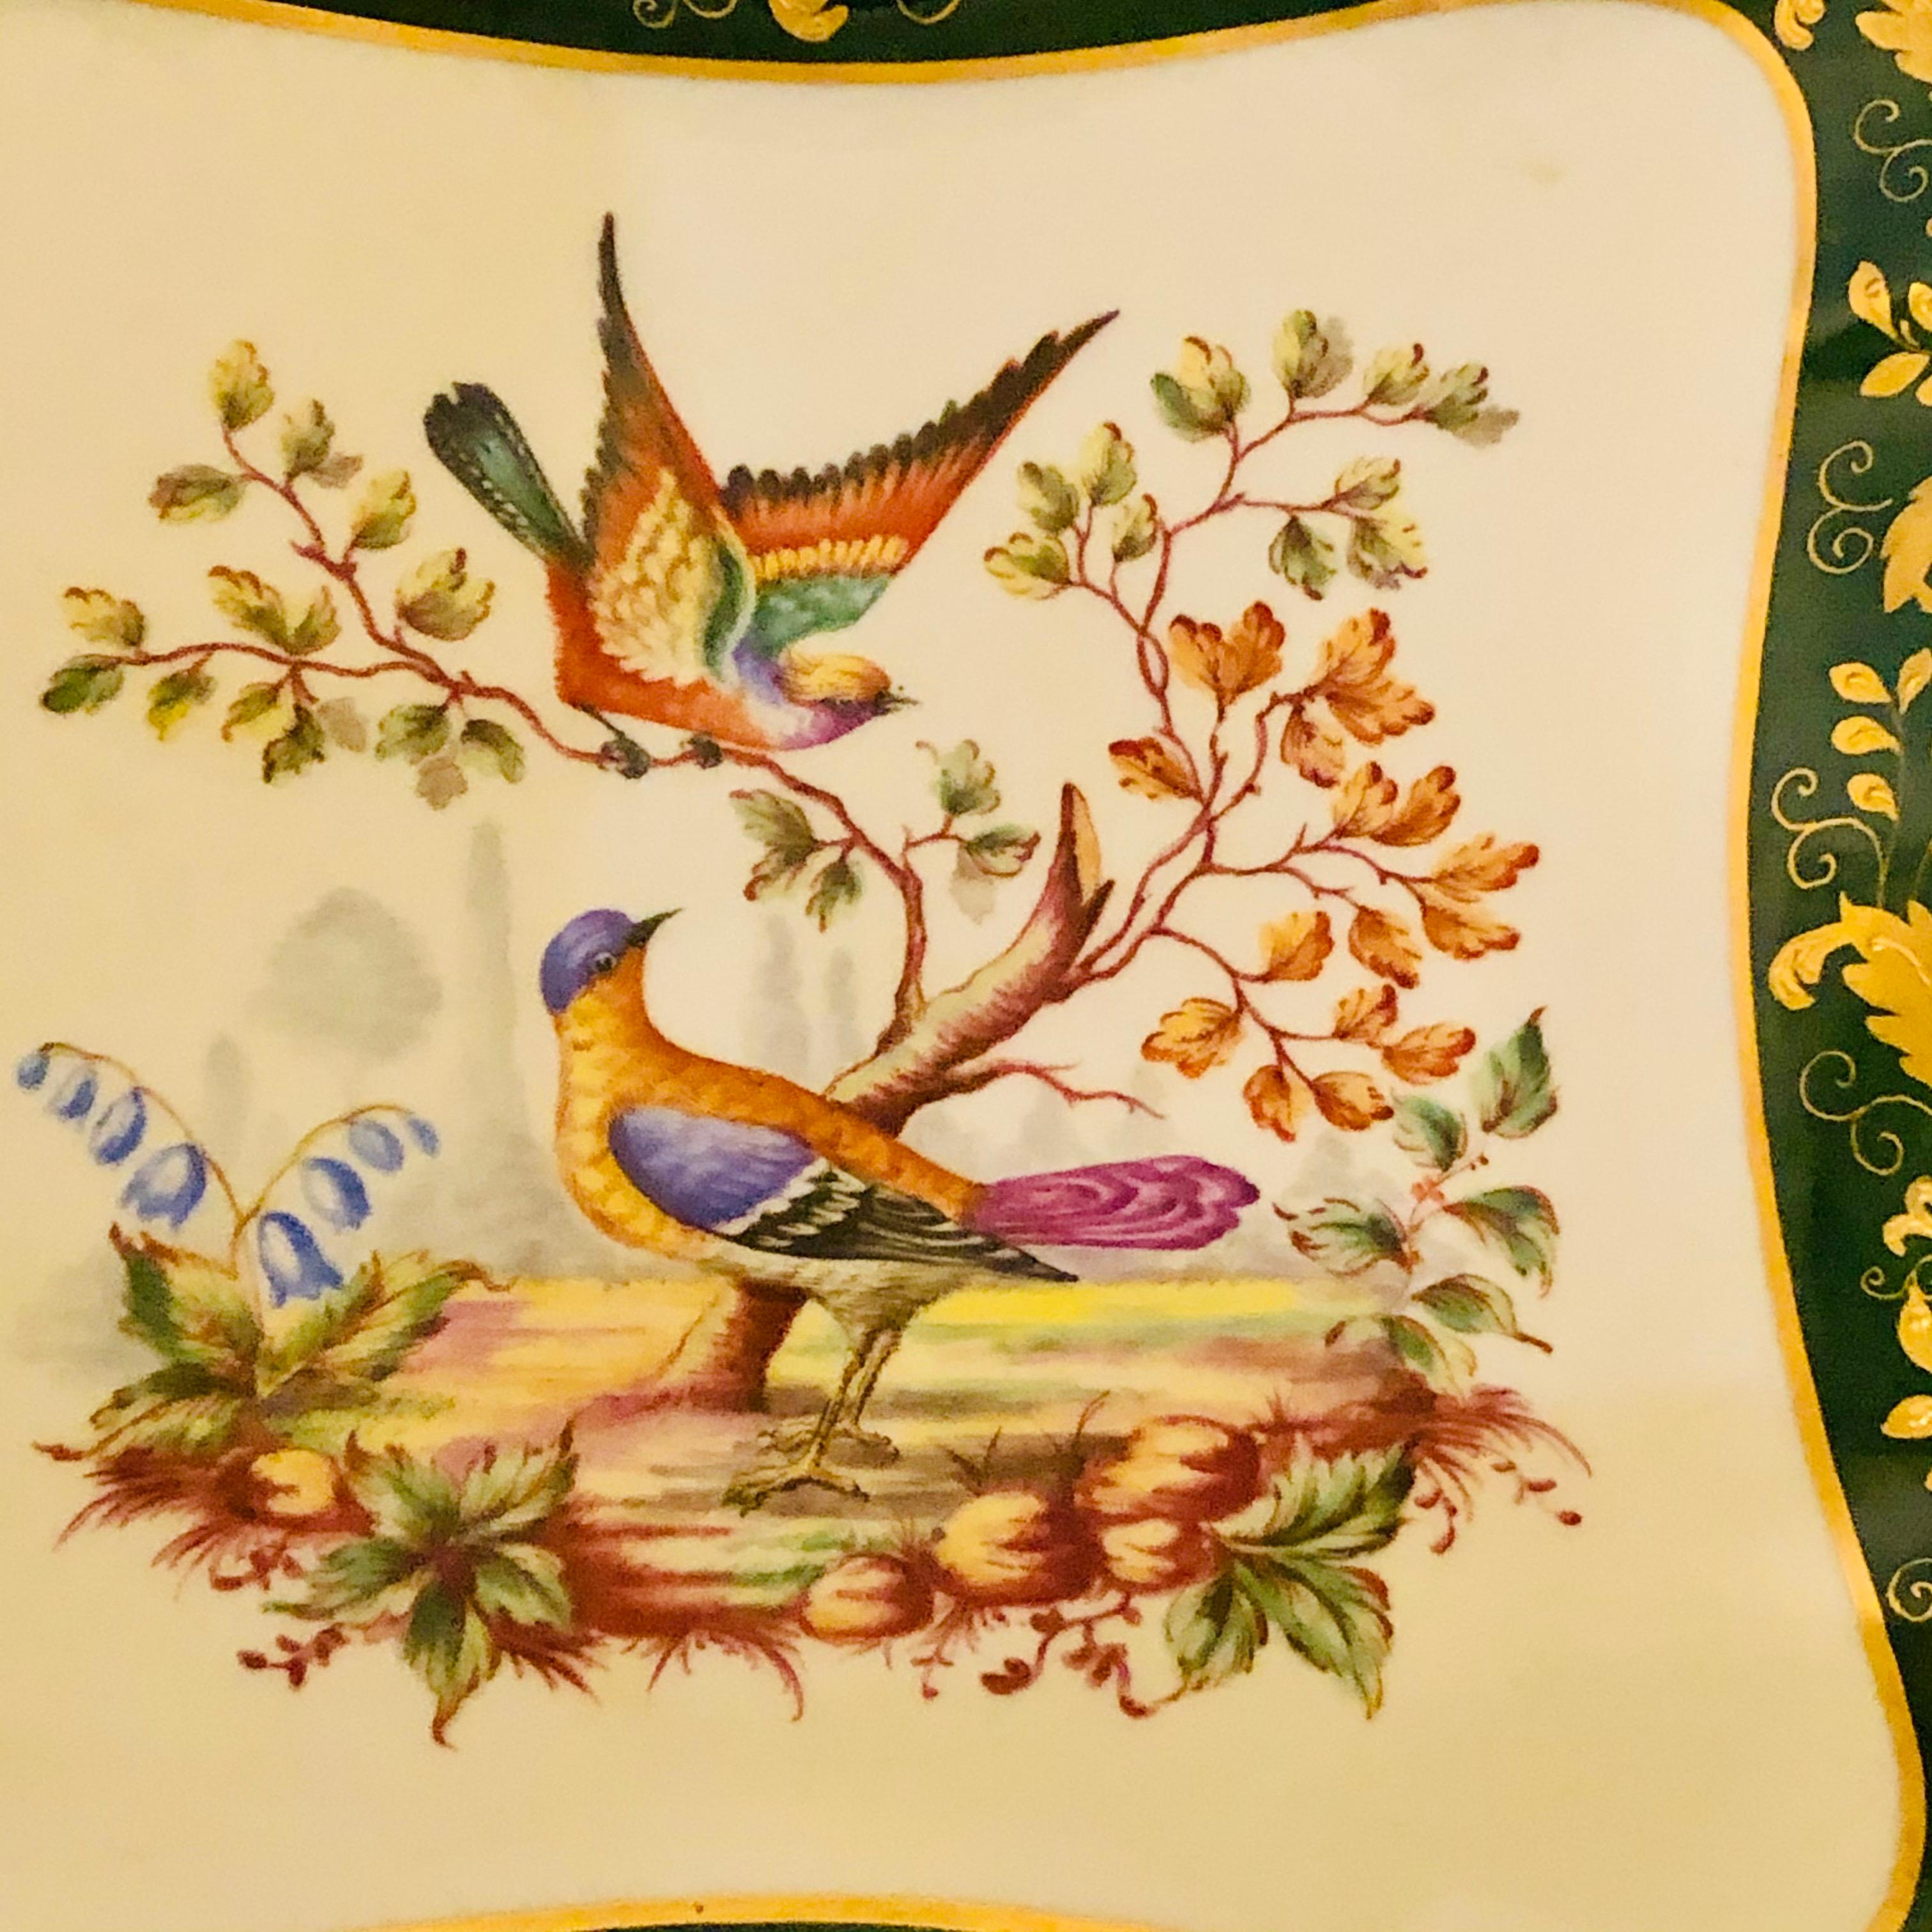 Le Tallec Green Bowl Painted with Colorful Birds with a Raised Gold Border 5